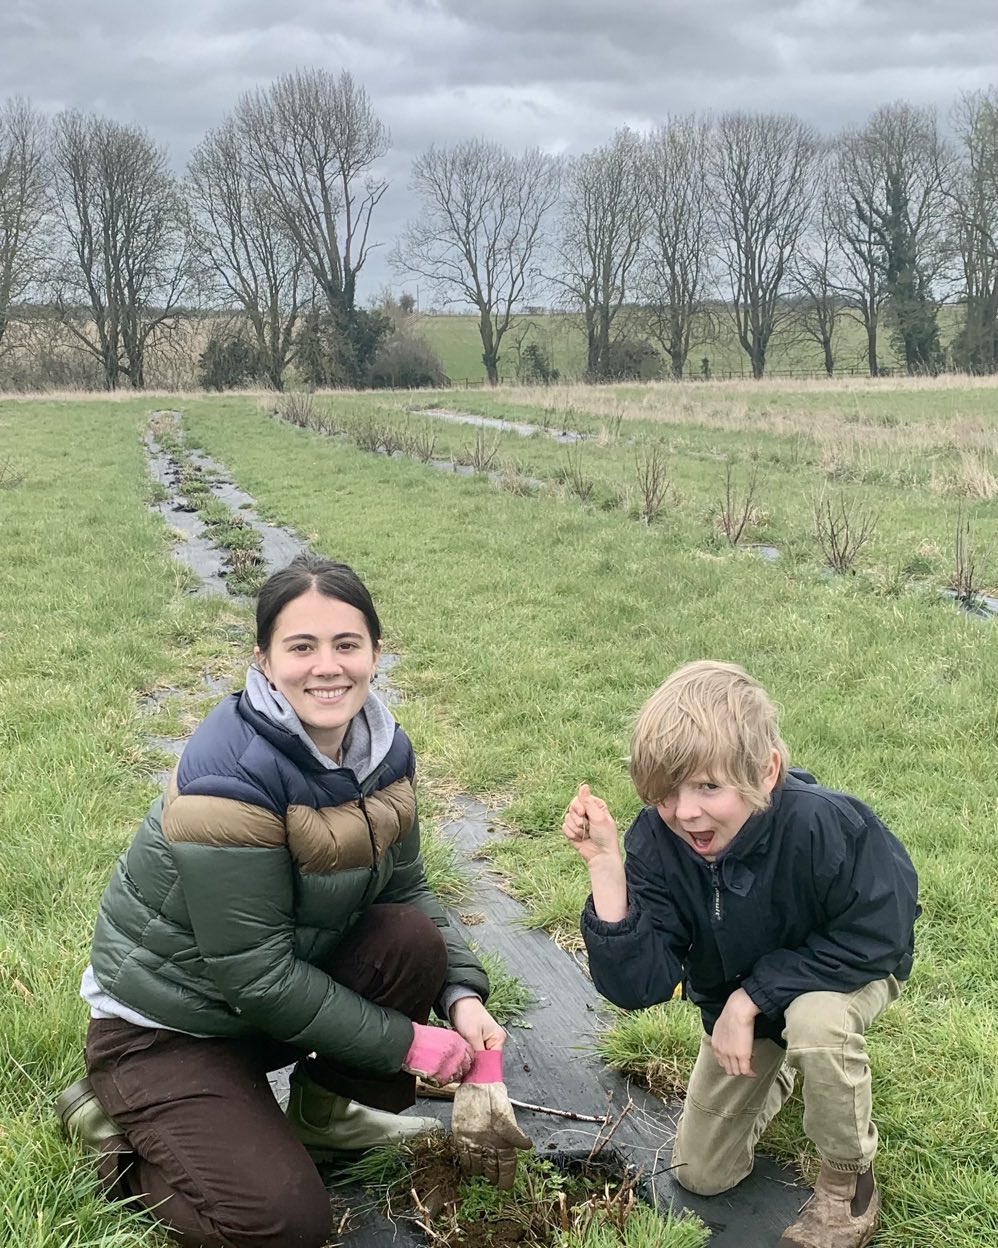 The son and heir celebrates pulling a single weed. Meanwhile, Olivia, the wonderful, Wisconsin Wwoofer pulls considerably more, to give the raspberries some room to breathe #organic #cotswolds #springjobs #softfruit #budtobottle #familyfarm